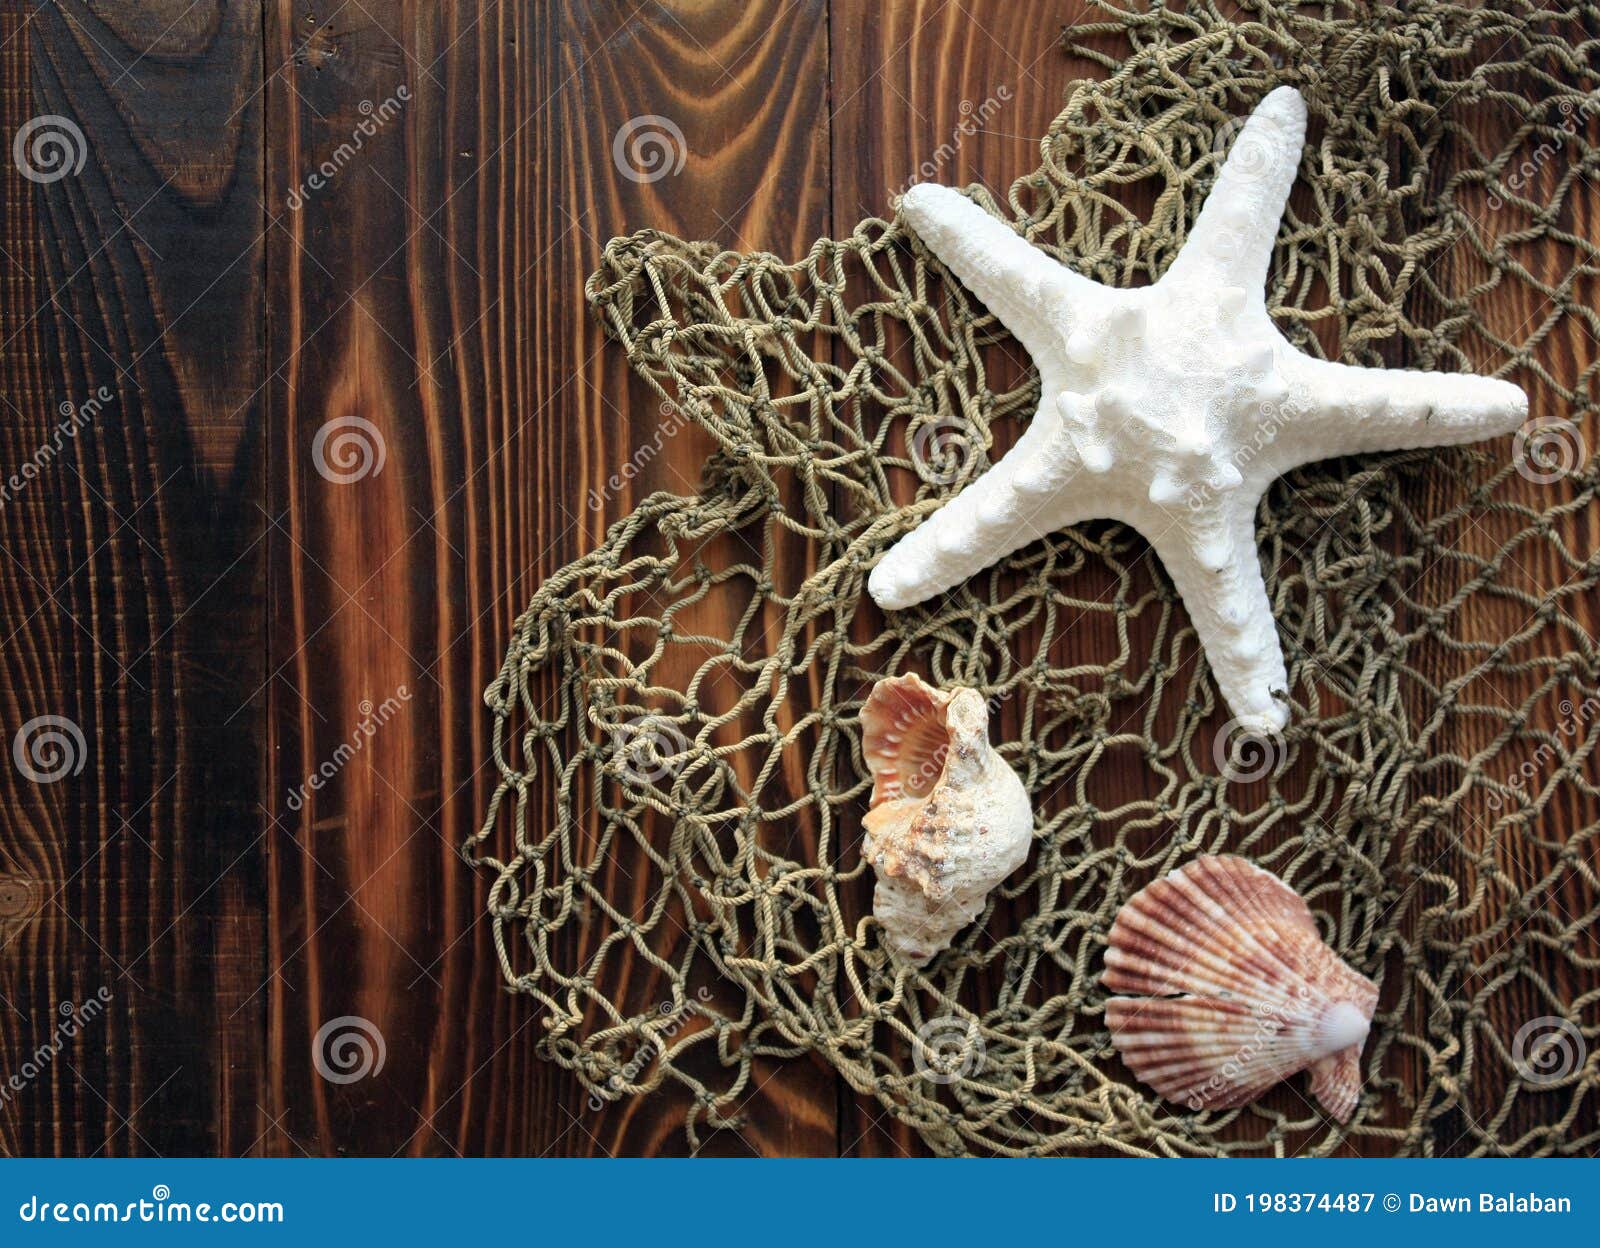 Star Fish and Shells Inside a Fishing Net. Stock Image - Image of